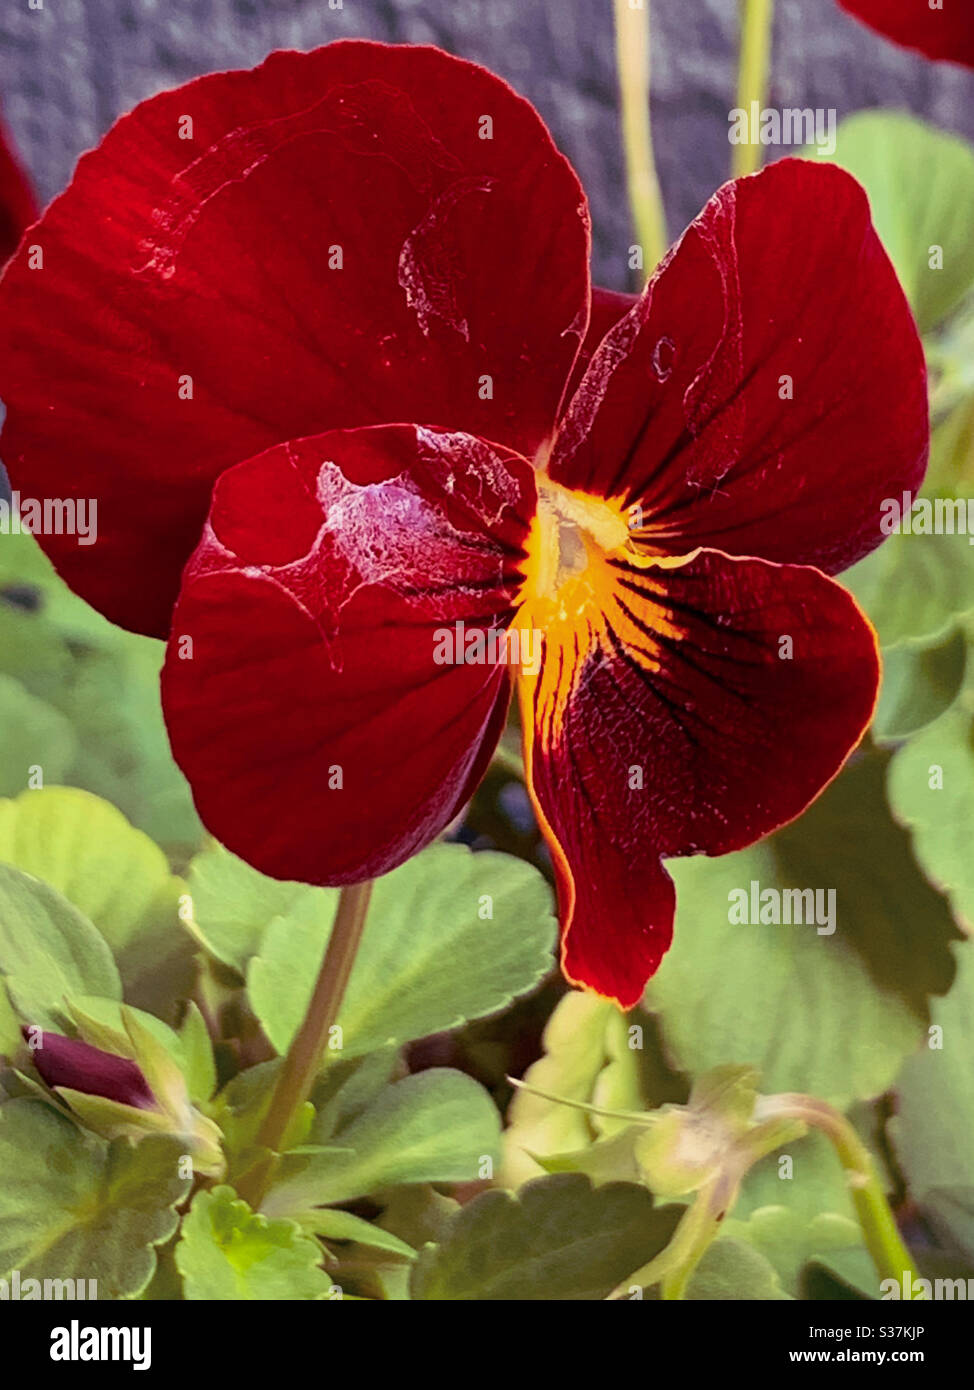 Red pansy flower with snail trail in evidence Stock Photo - Alamy